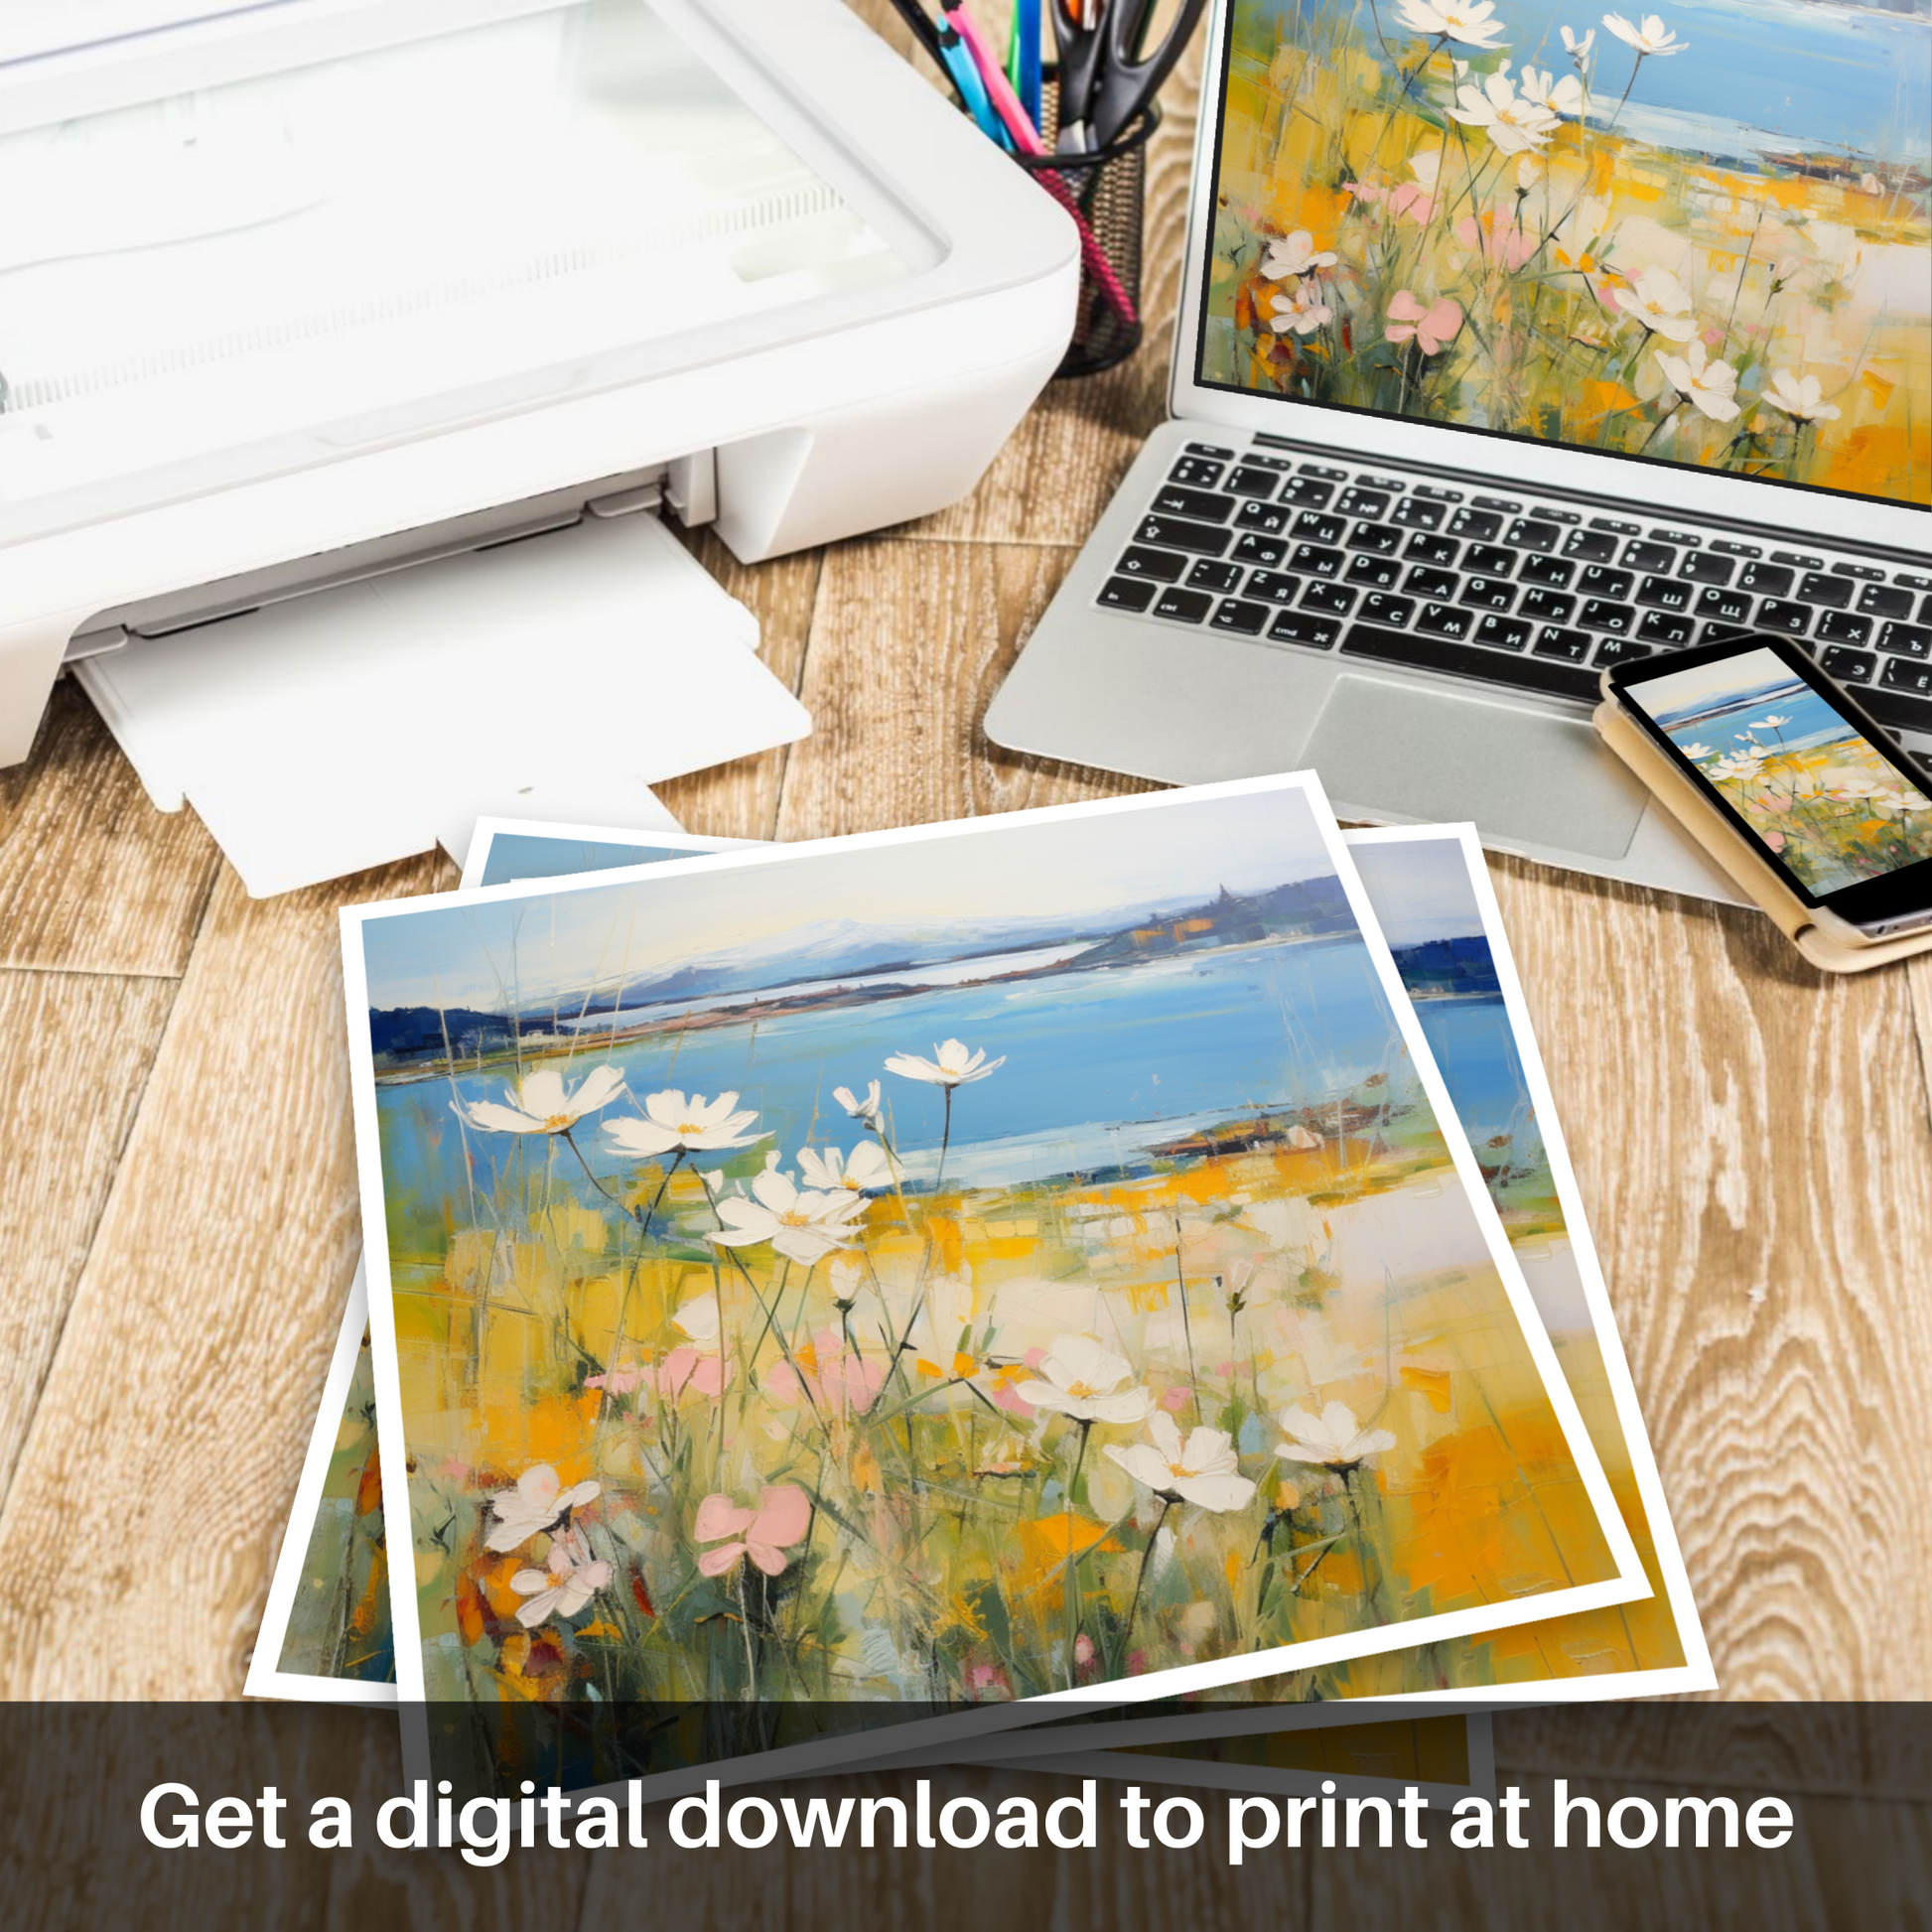 Downloadable and printable picture of Wildflowers by Loch Lomond